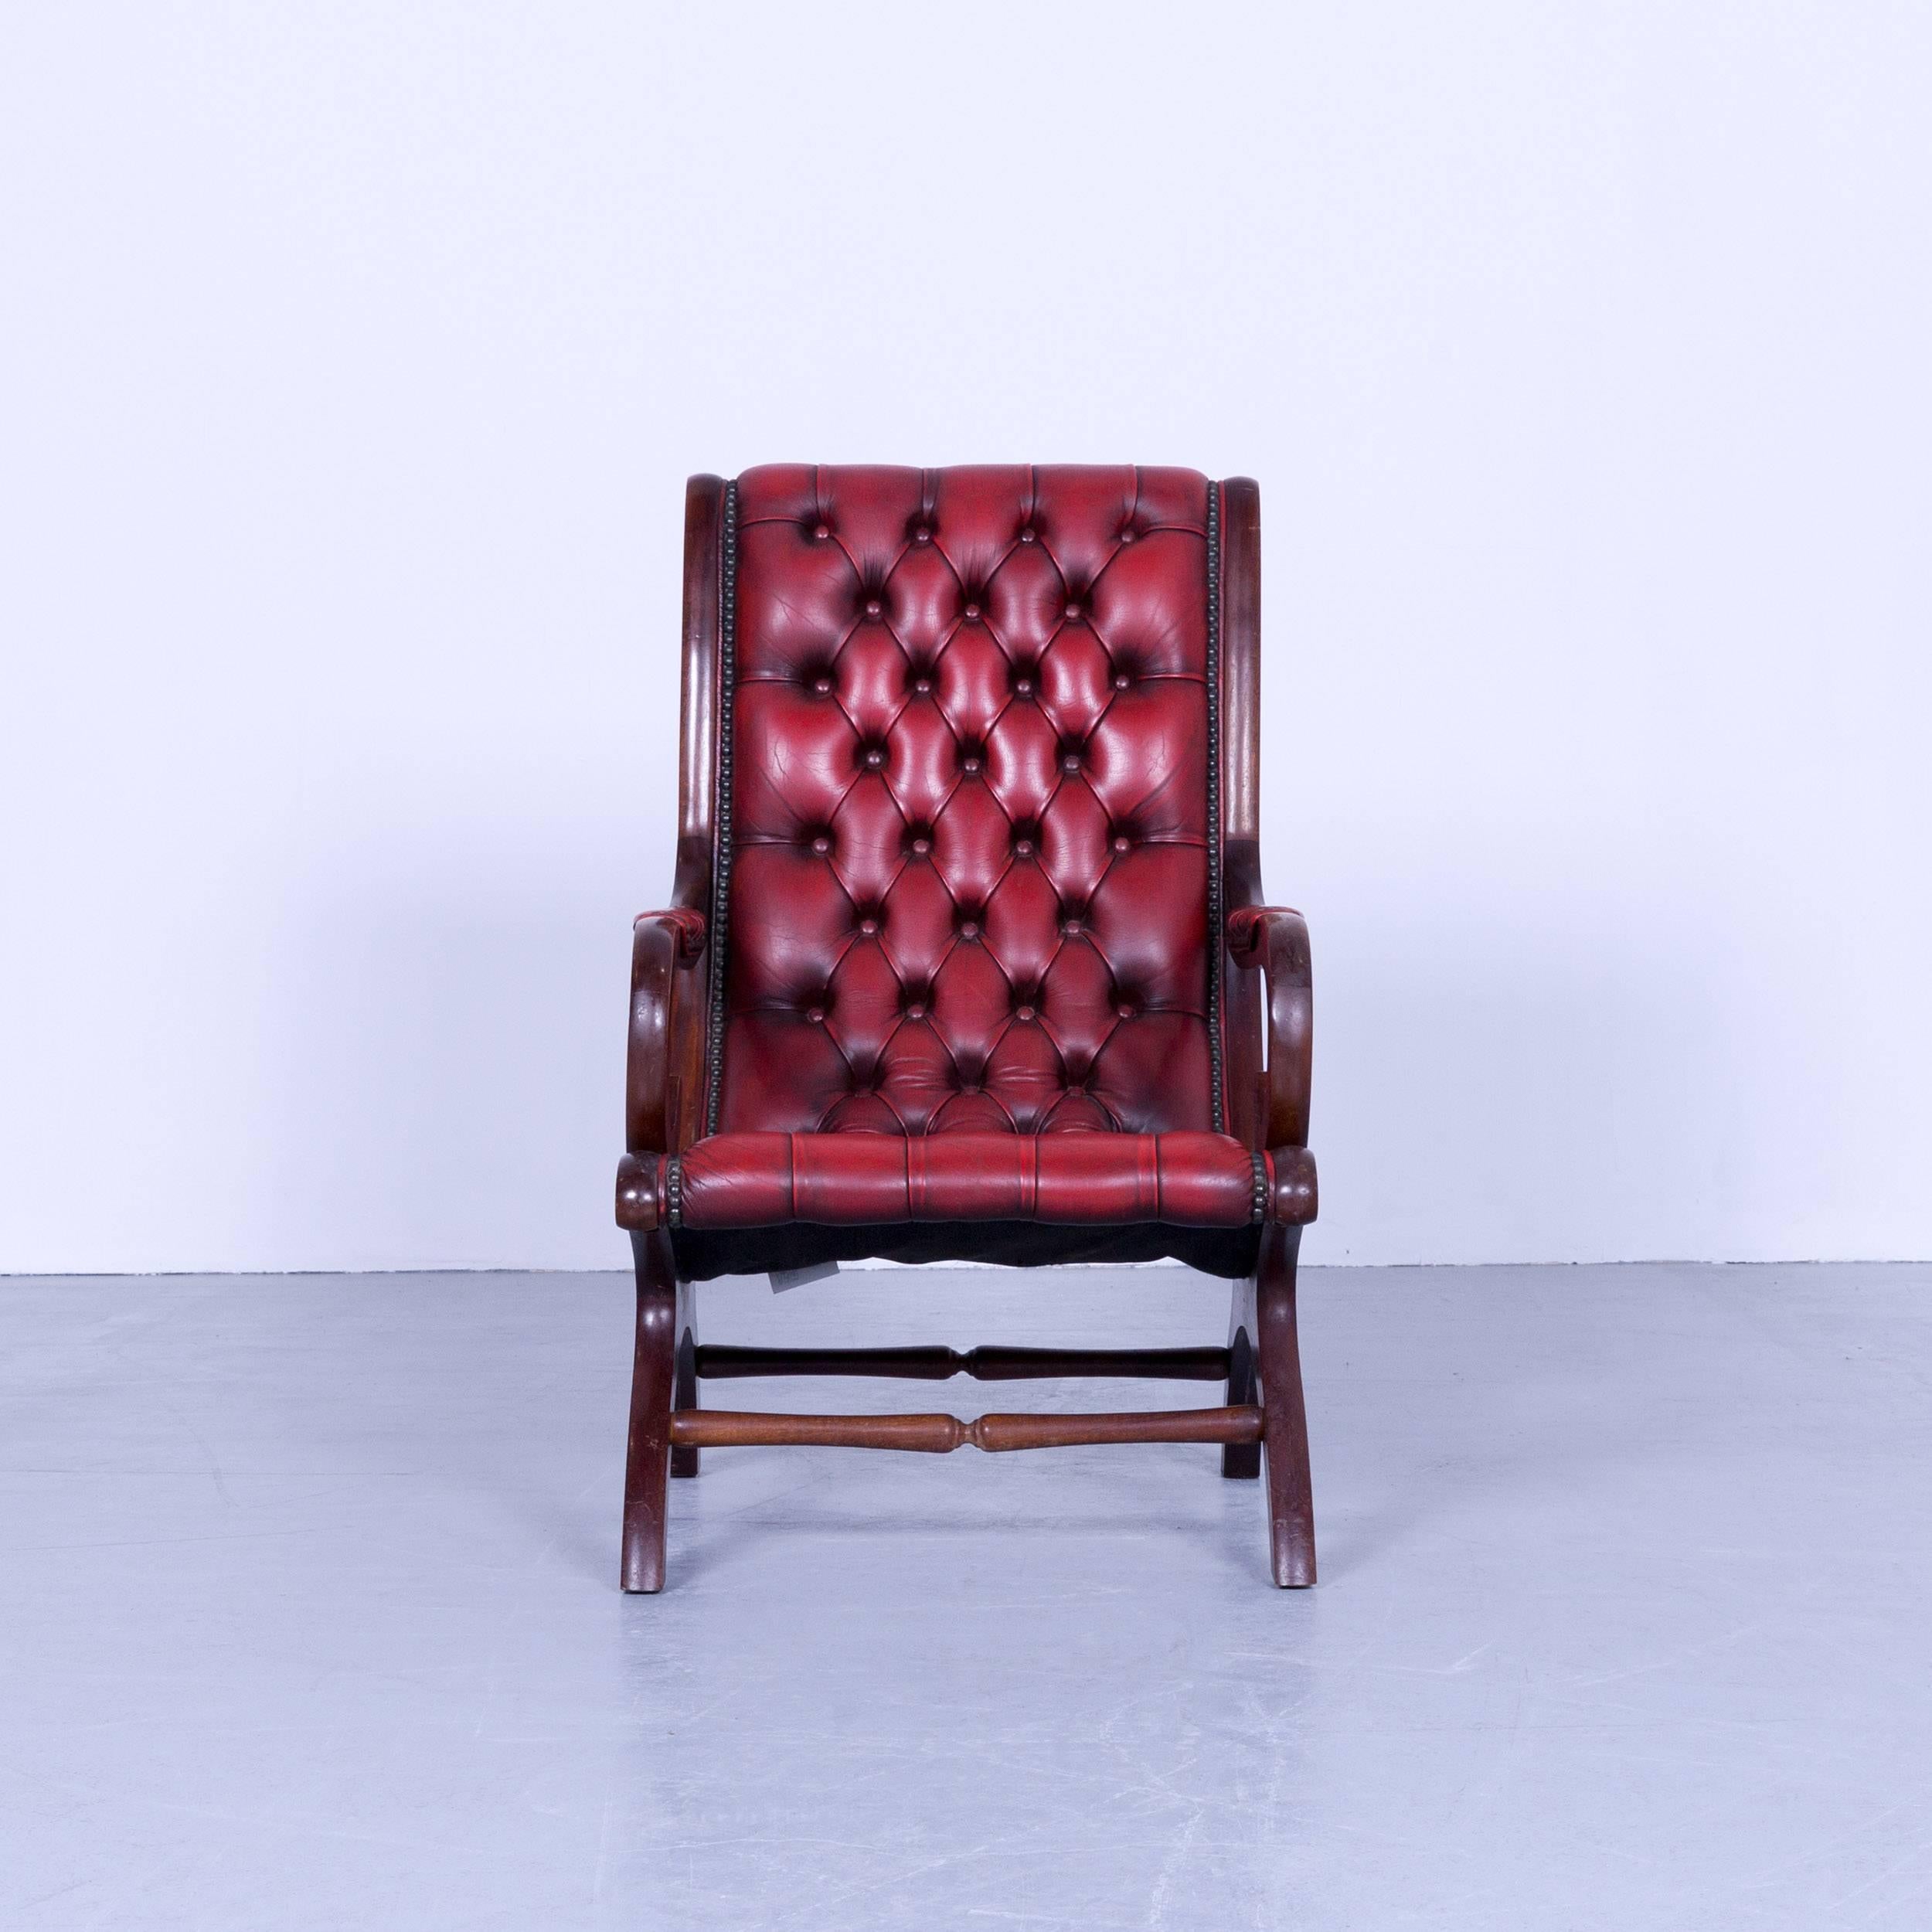 Chesterfield armchair oxblood red leather buttoned vintage retro wood handmade.